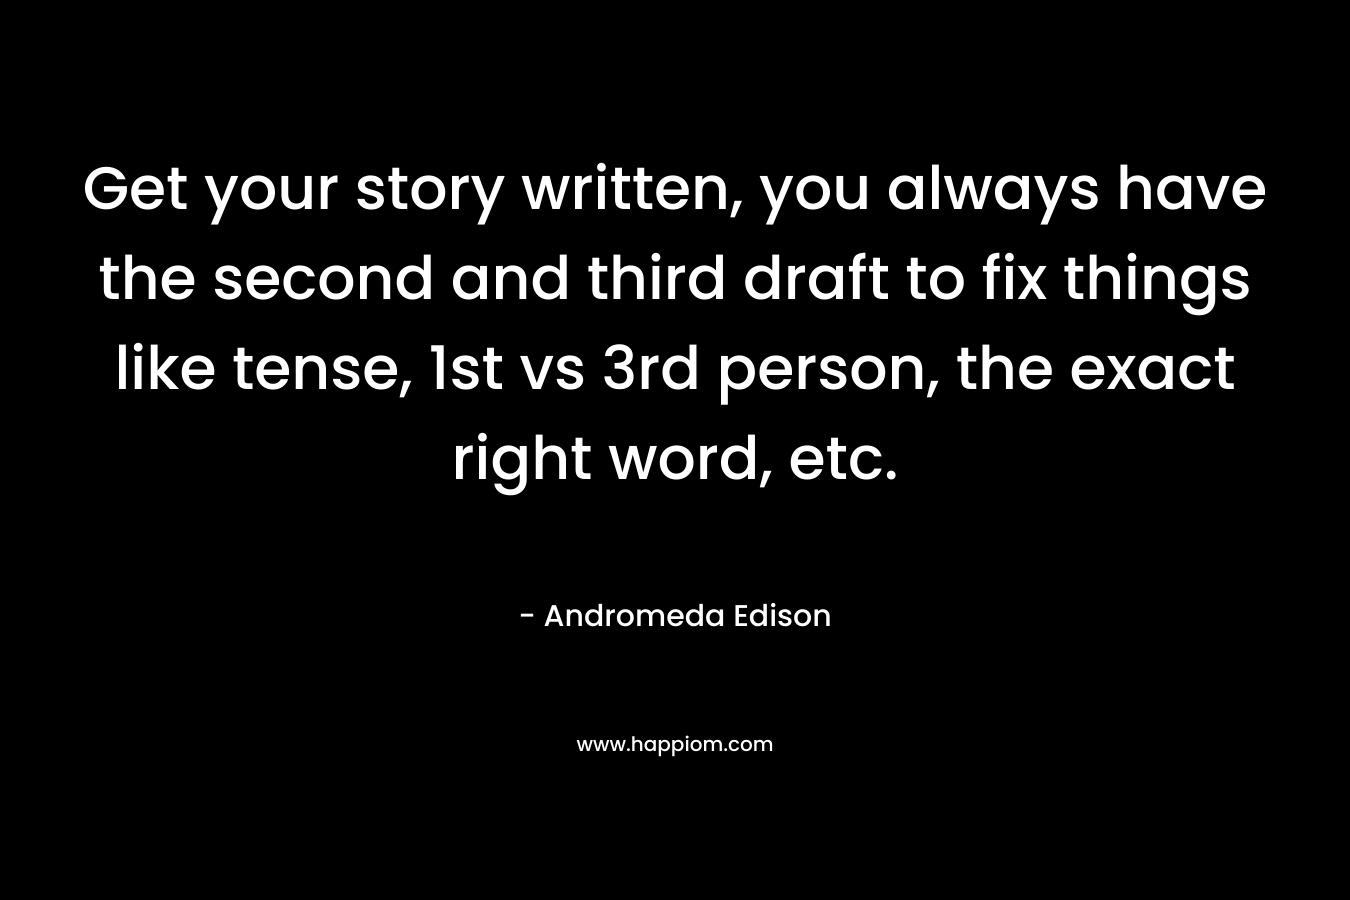 Get your story written, you always have the second and third draft to fix things like tense, 1st vs 3rd person, the exact right word, etc. – Andromeda Edison